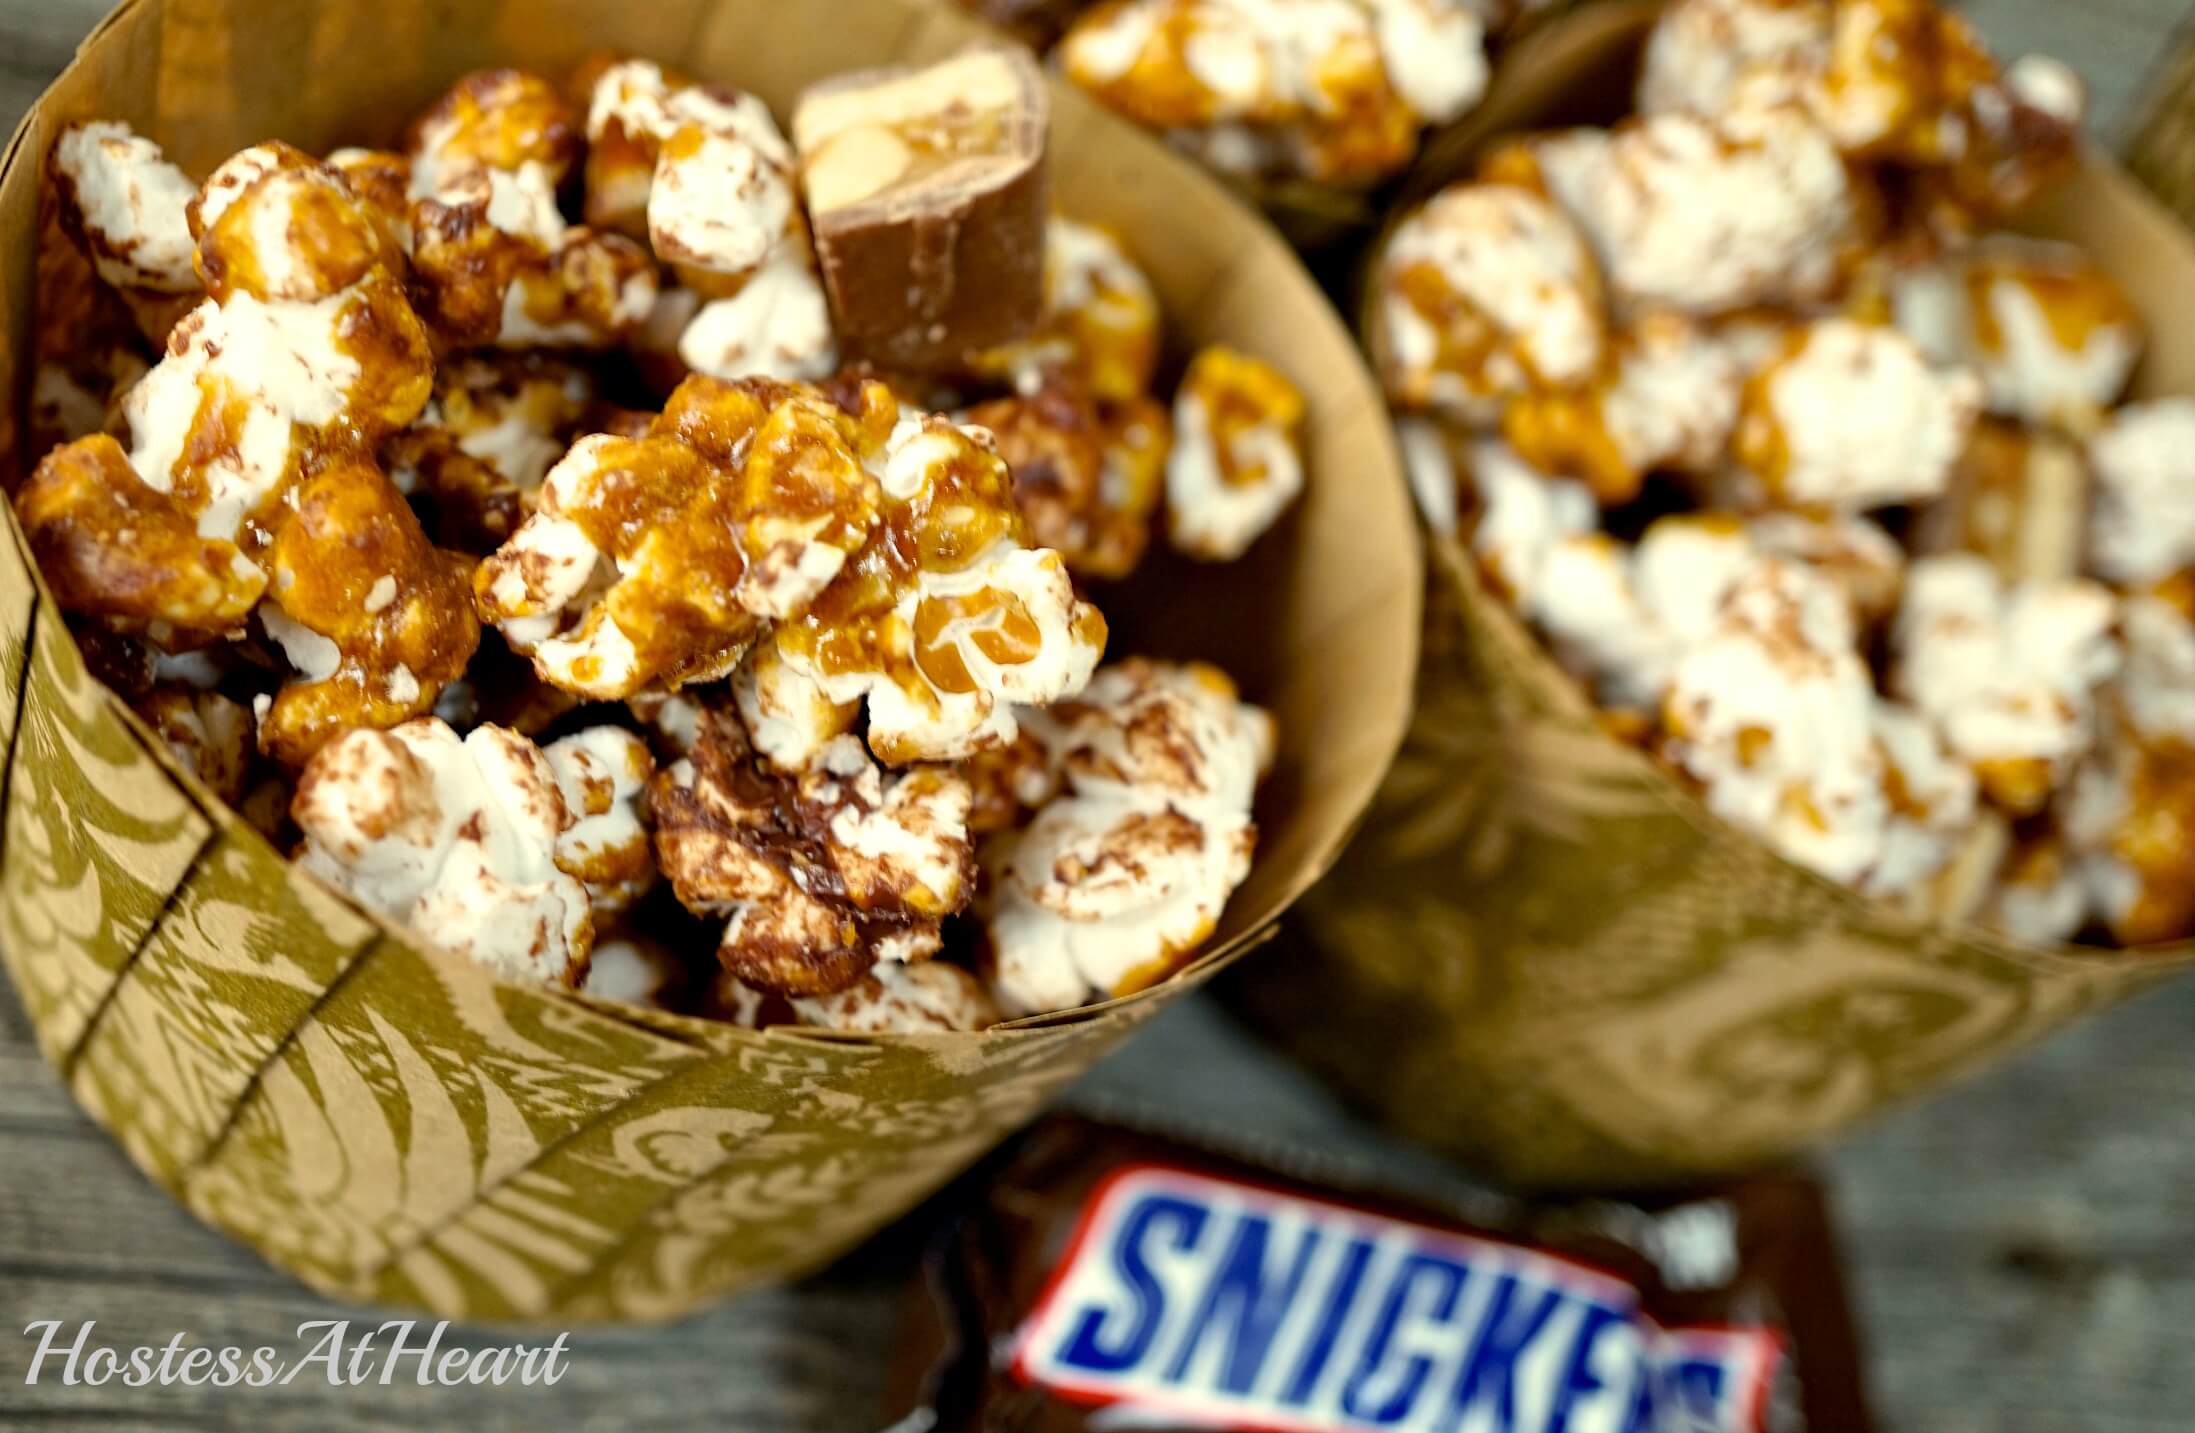 Candy bar Popcorn sitting in cups over a wooden background. A Snickers candy bar sits off to the side.